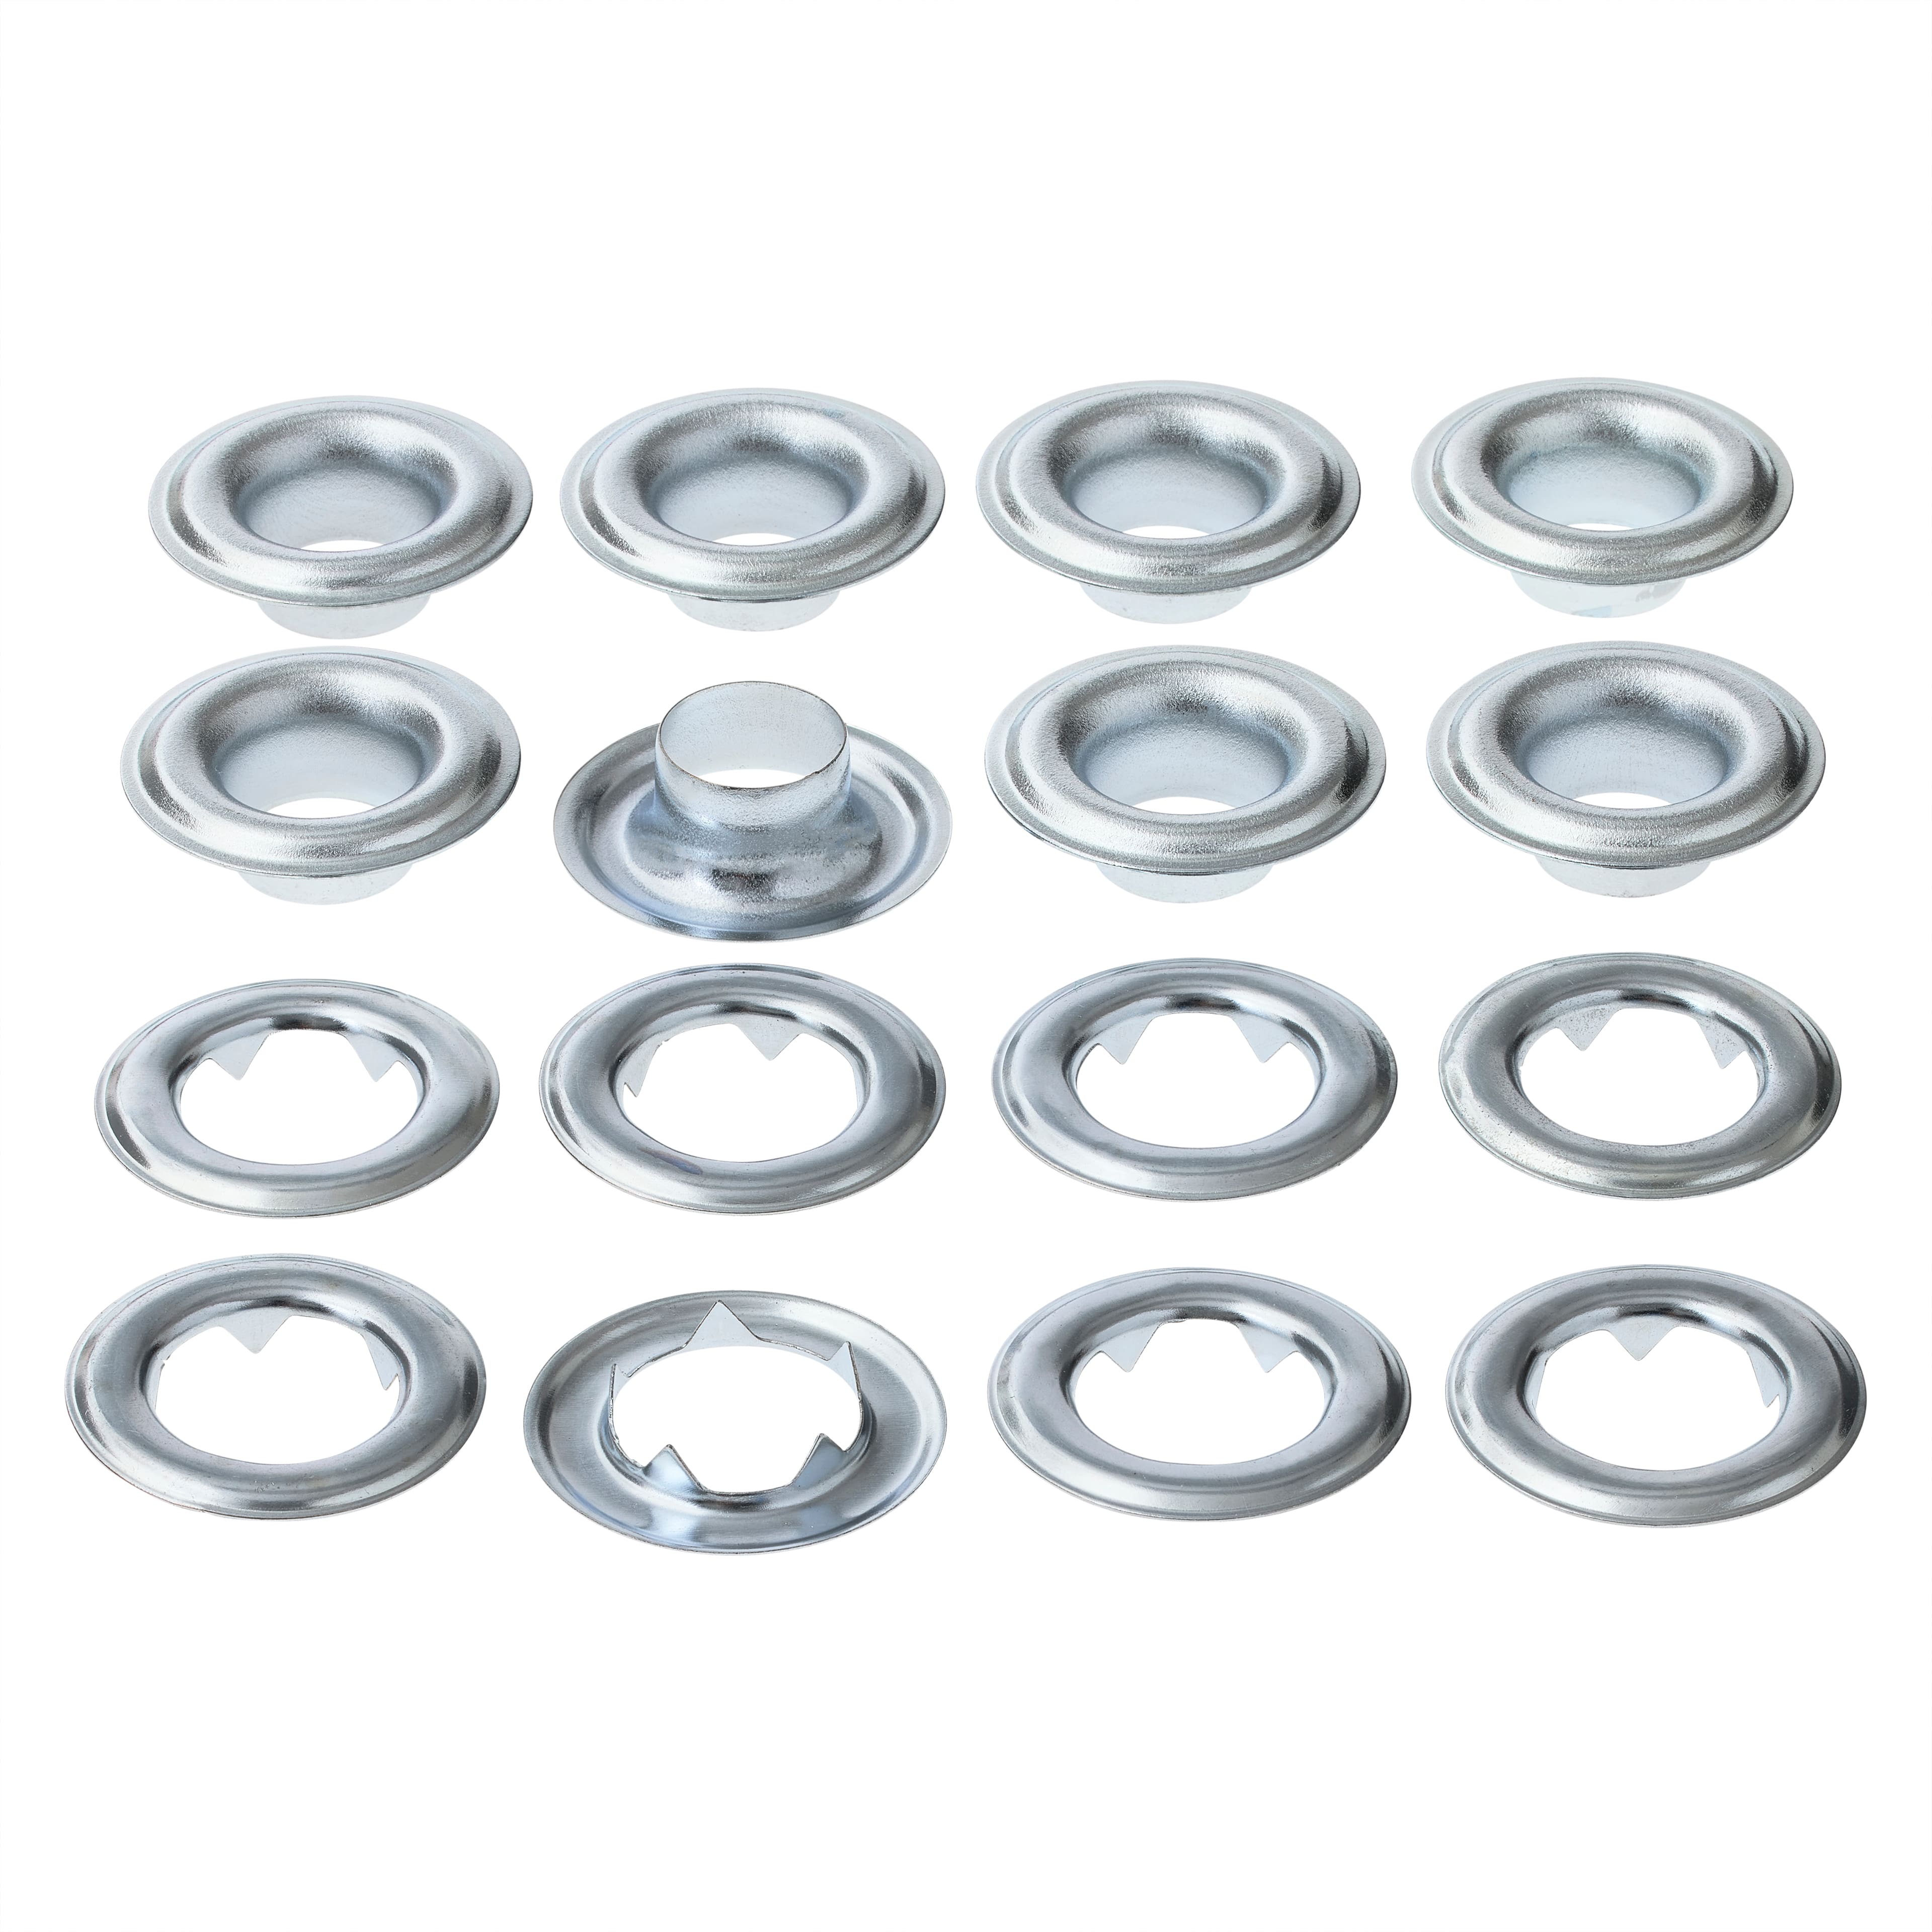 12 Packs: 7 ct. (84 total) Silver Heavy Duty Snaps by Loops & Threads™